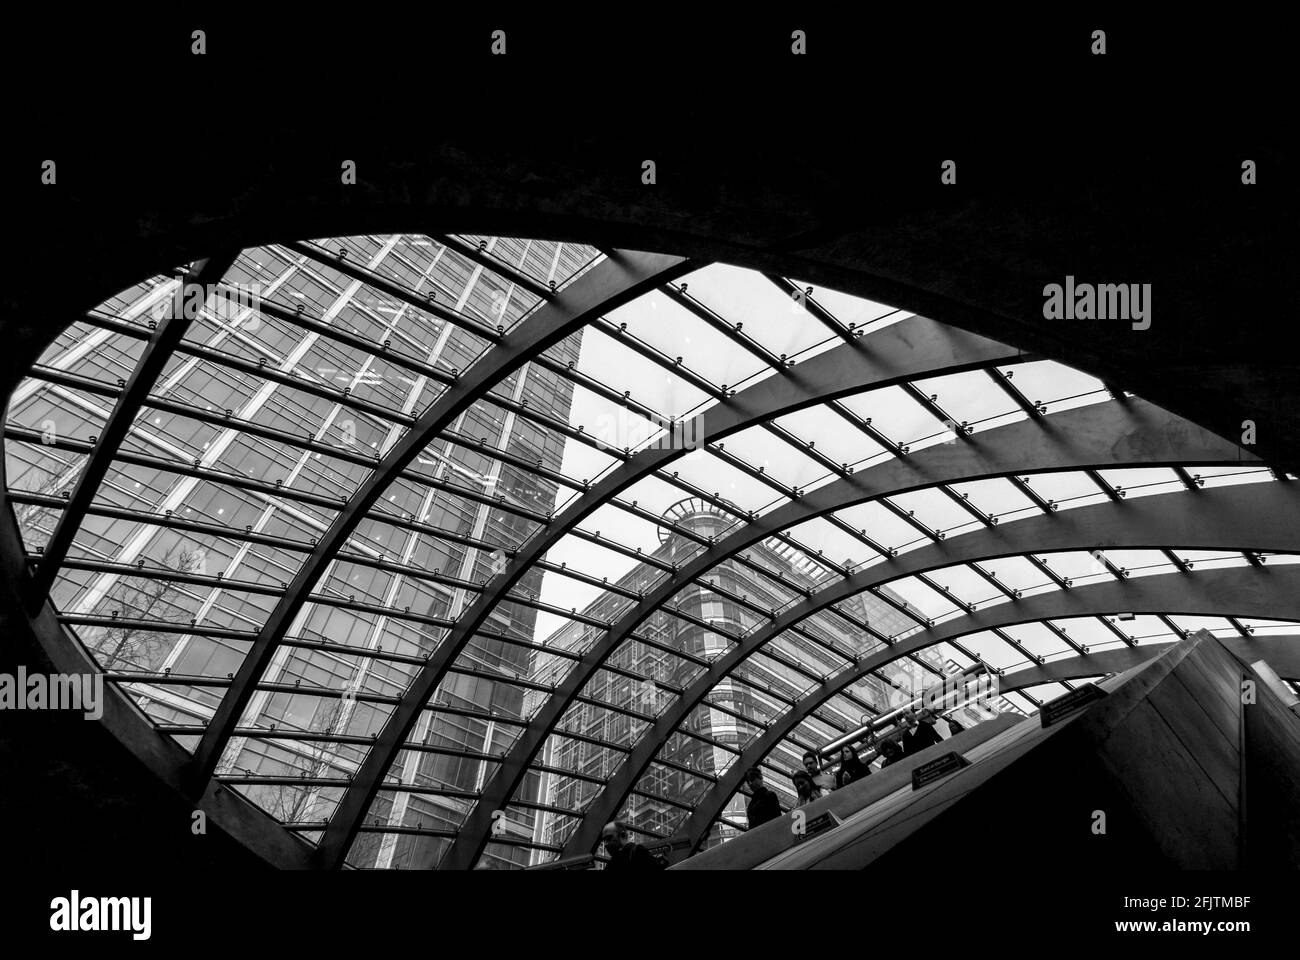 The curved glass canopy over the entrance of Canary Wharf underground / tube station, London, UK seen from inside / below. B&W Stock Photo